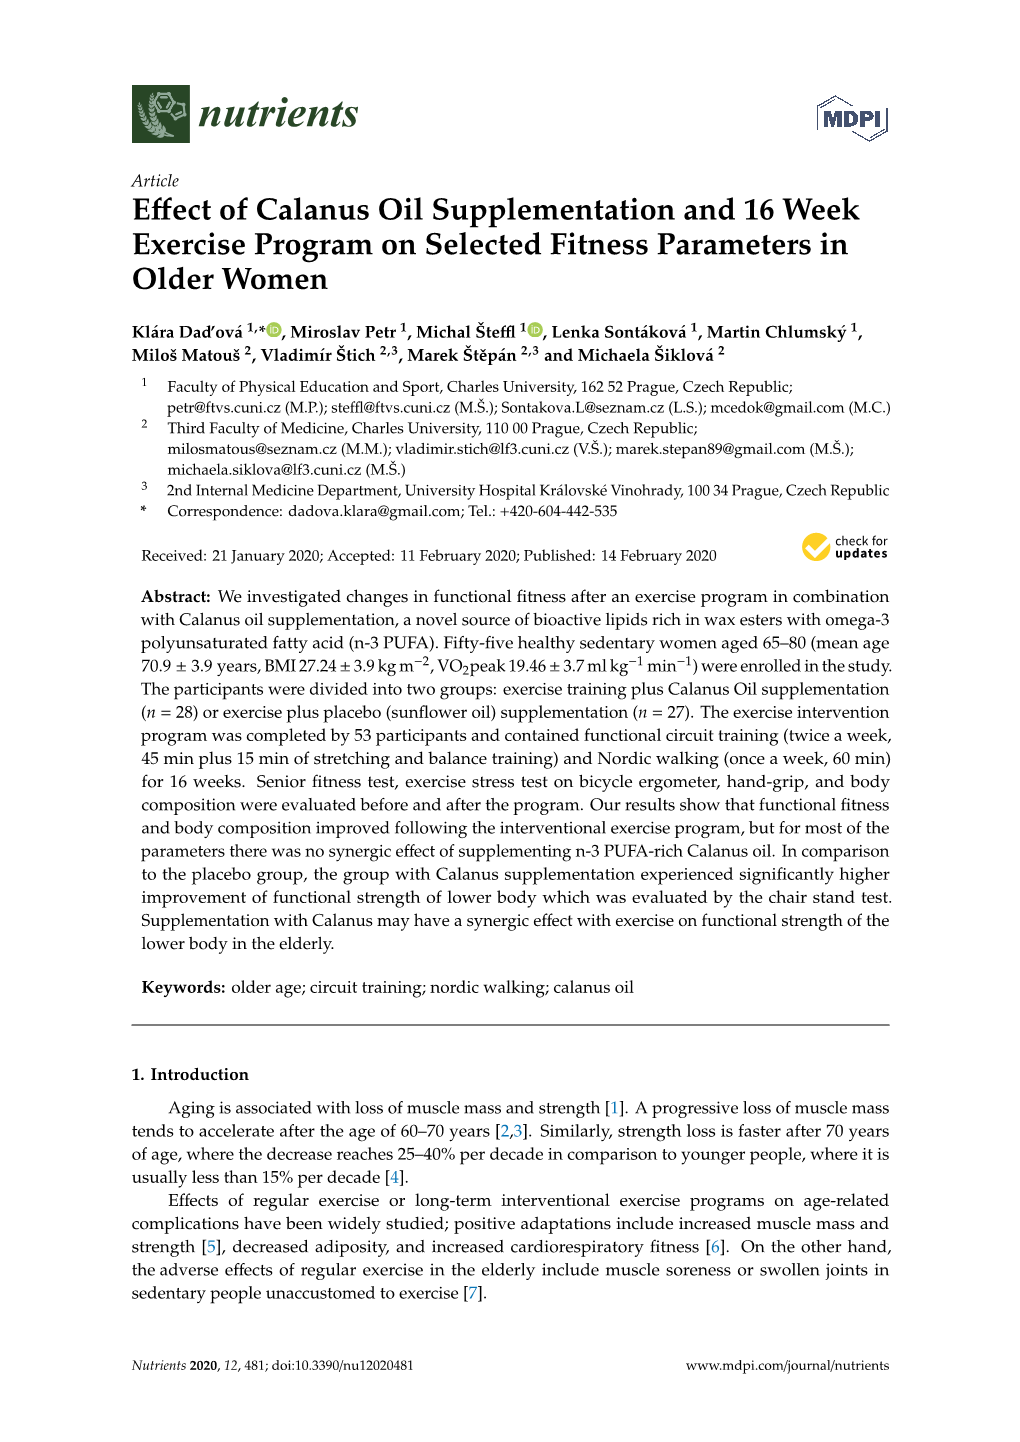 Effect of Calanus Oil Supplementation and 16 Week Exercise Program On